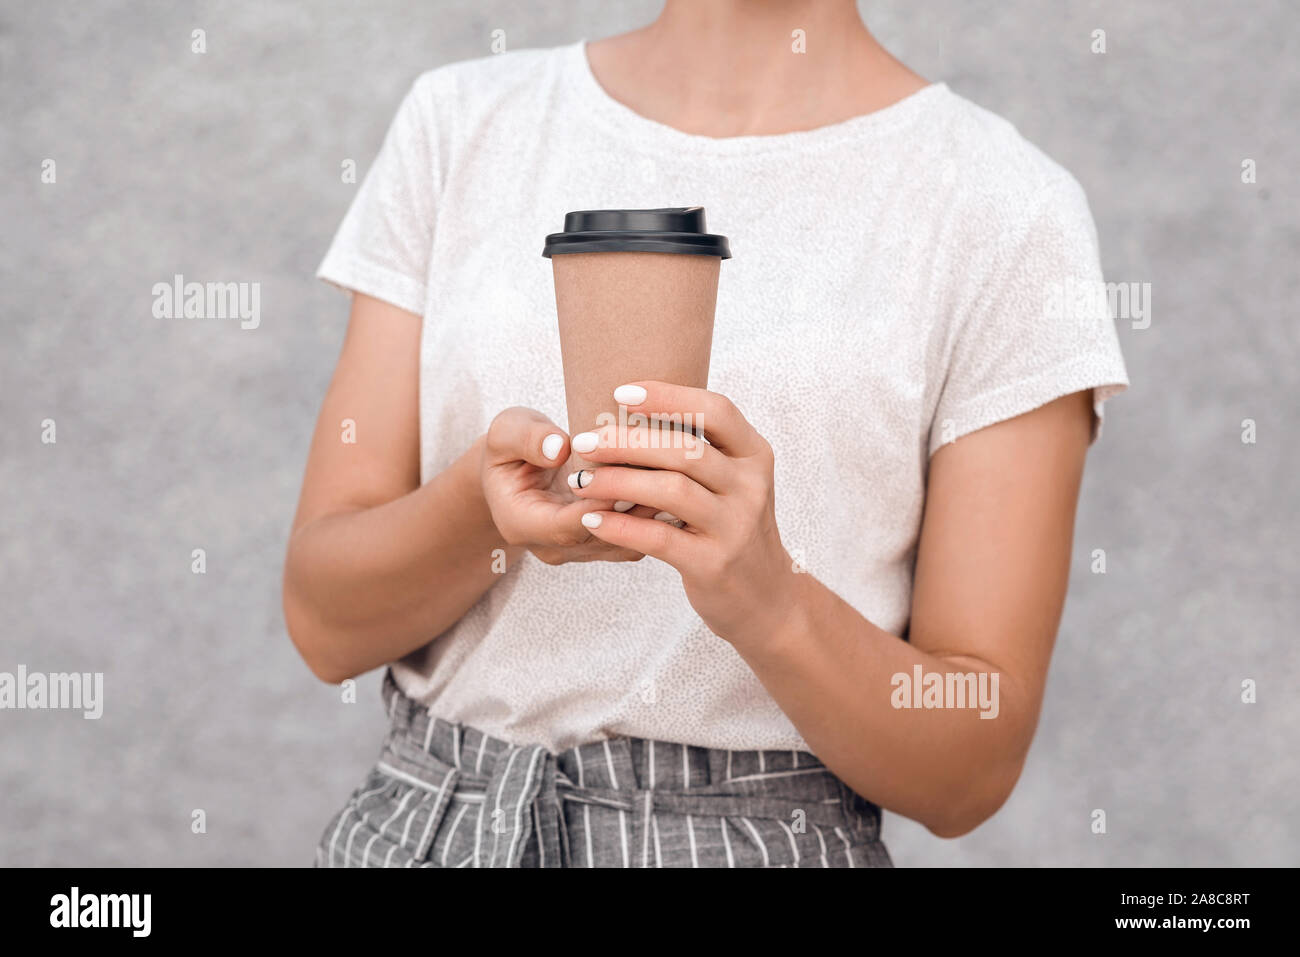 A paper coffee cup isolated on transparent background 1482421